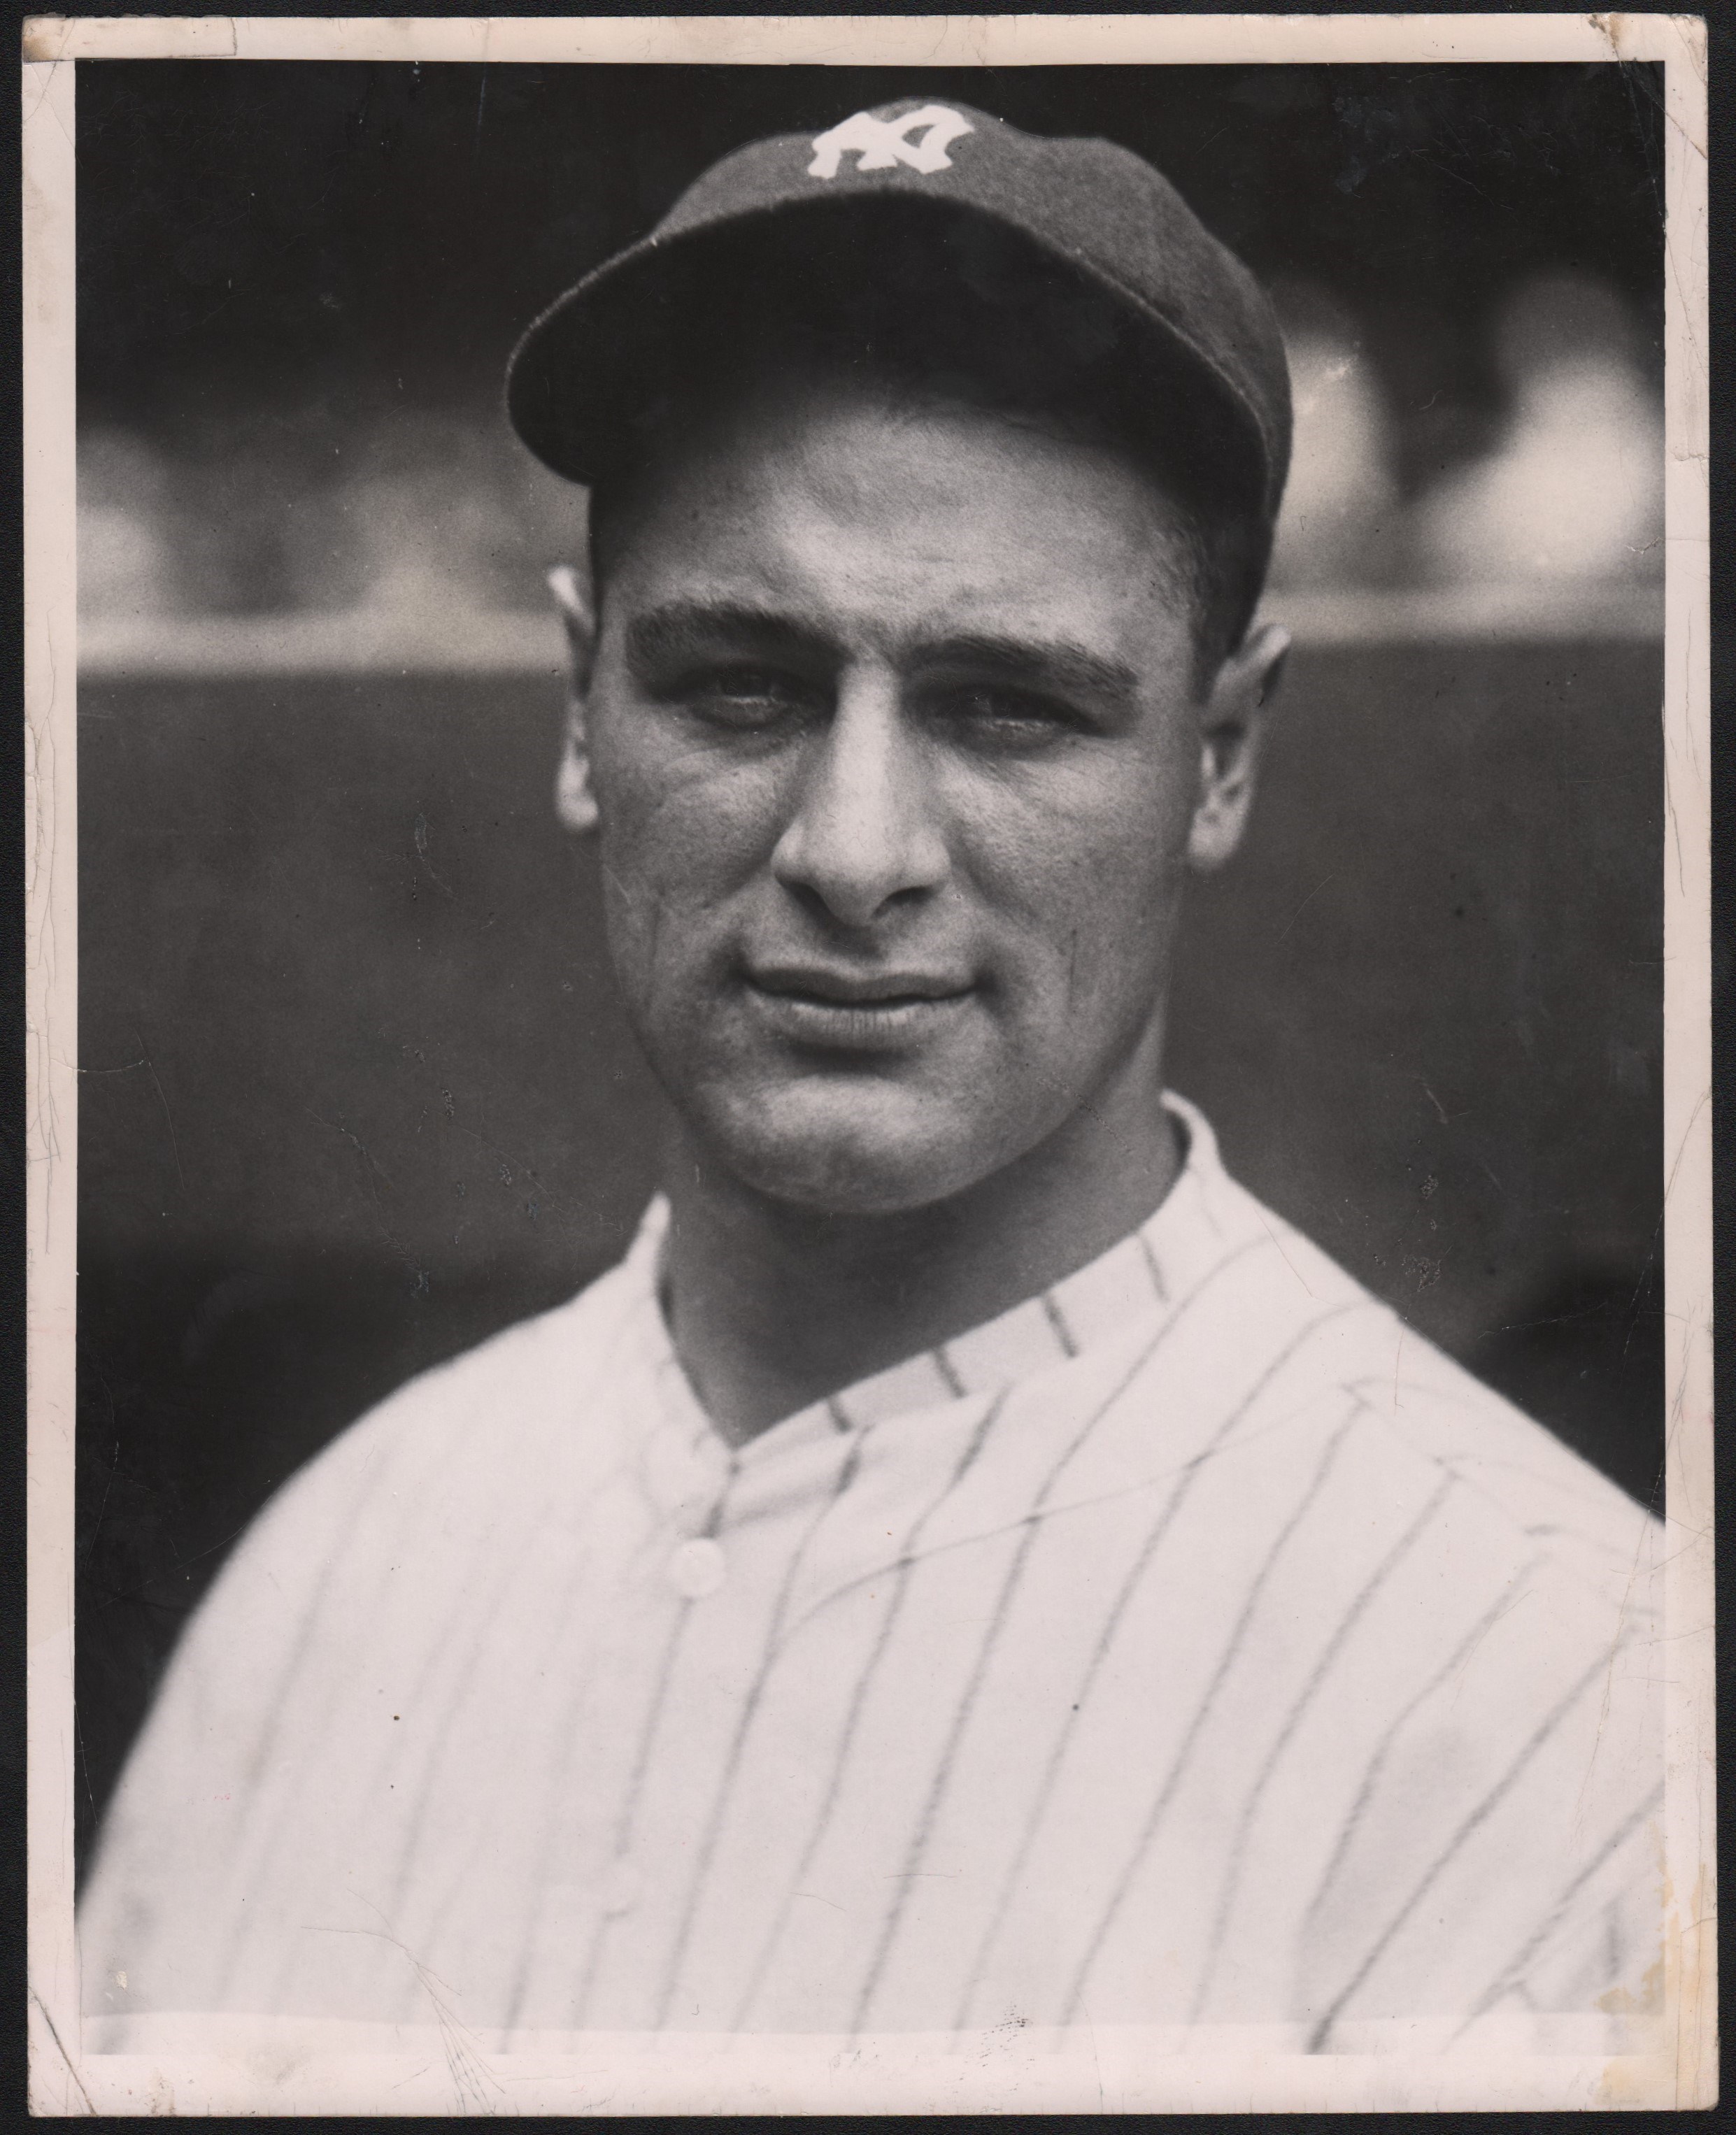 1927 The Eyes of Lou Gehrig 8x10 Photo by Charles Conlon First Generation from Original Negative